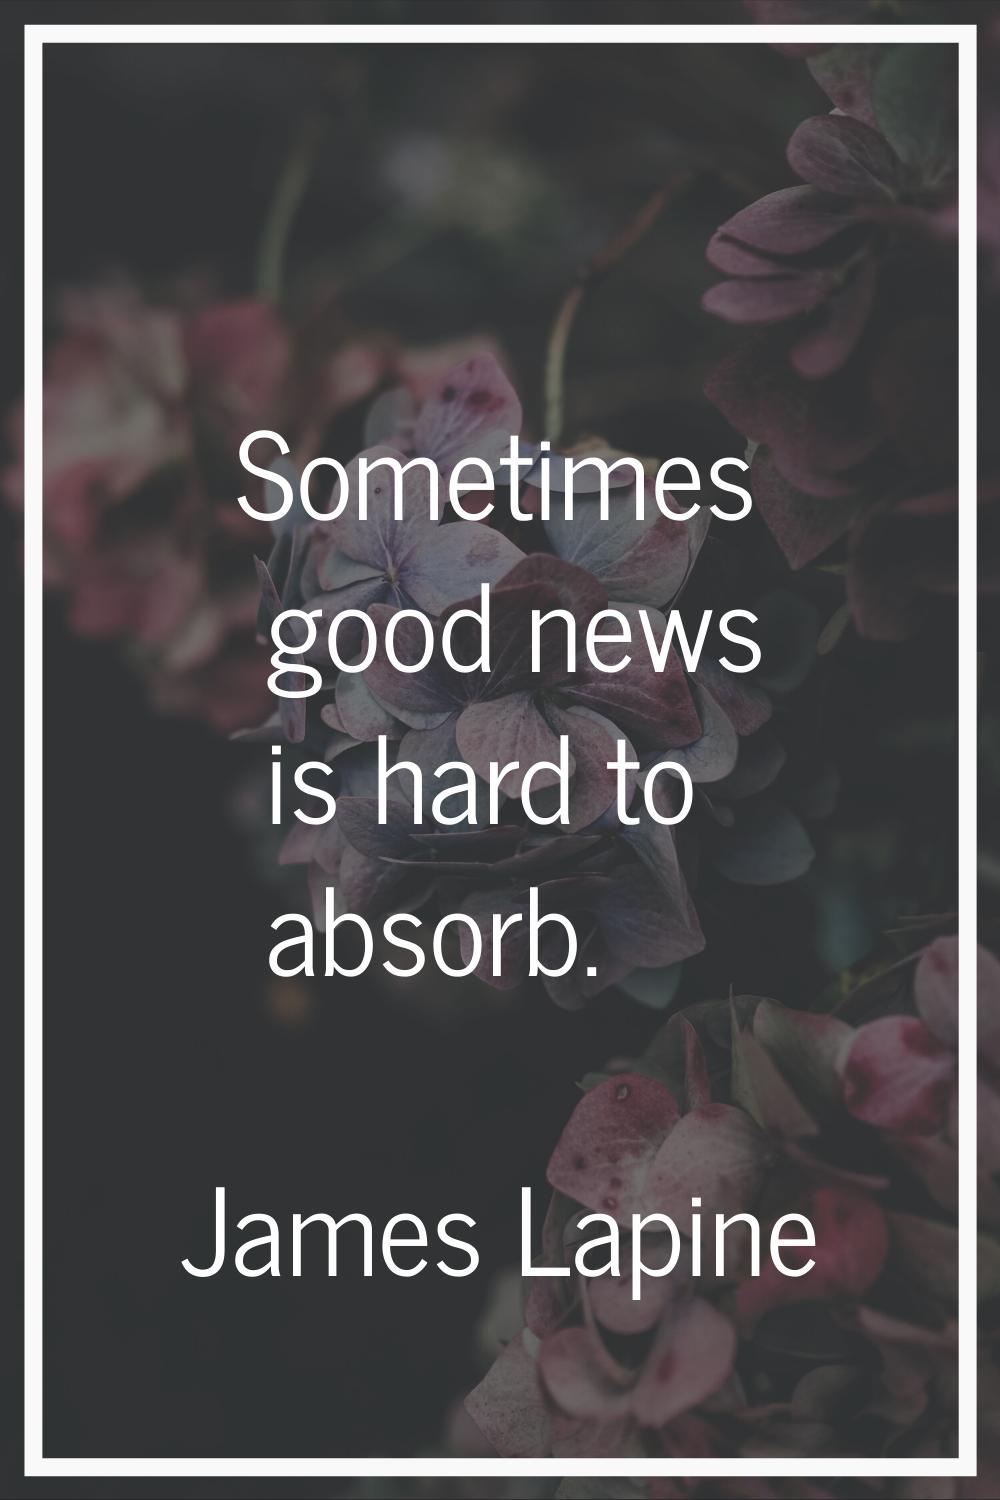 Sometimes good news is hard to absorb.